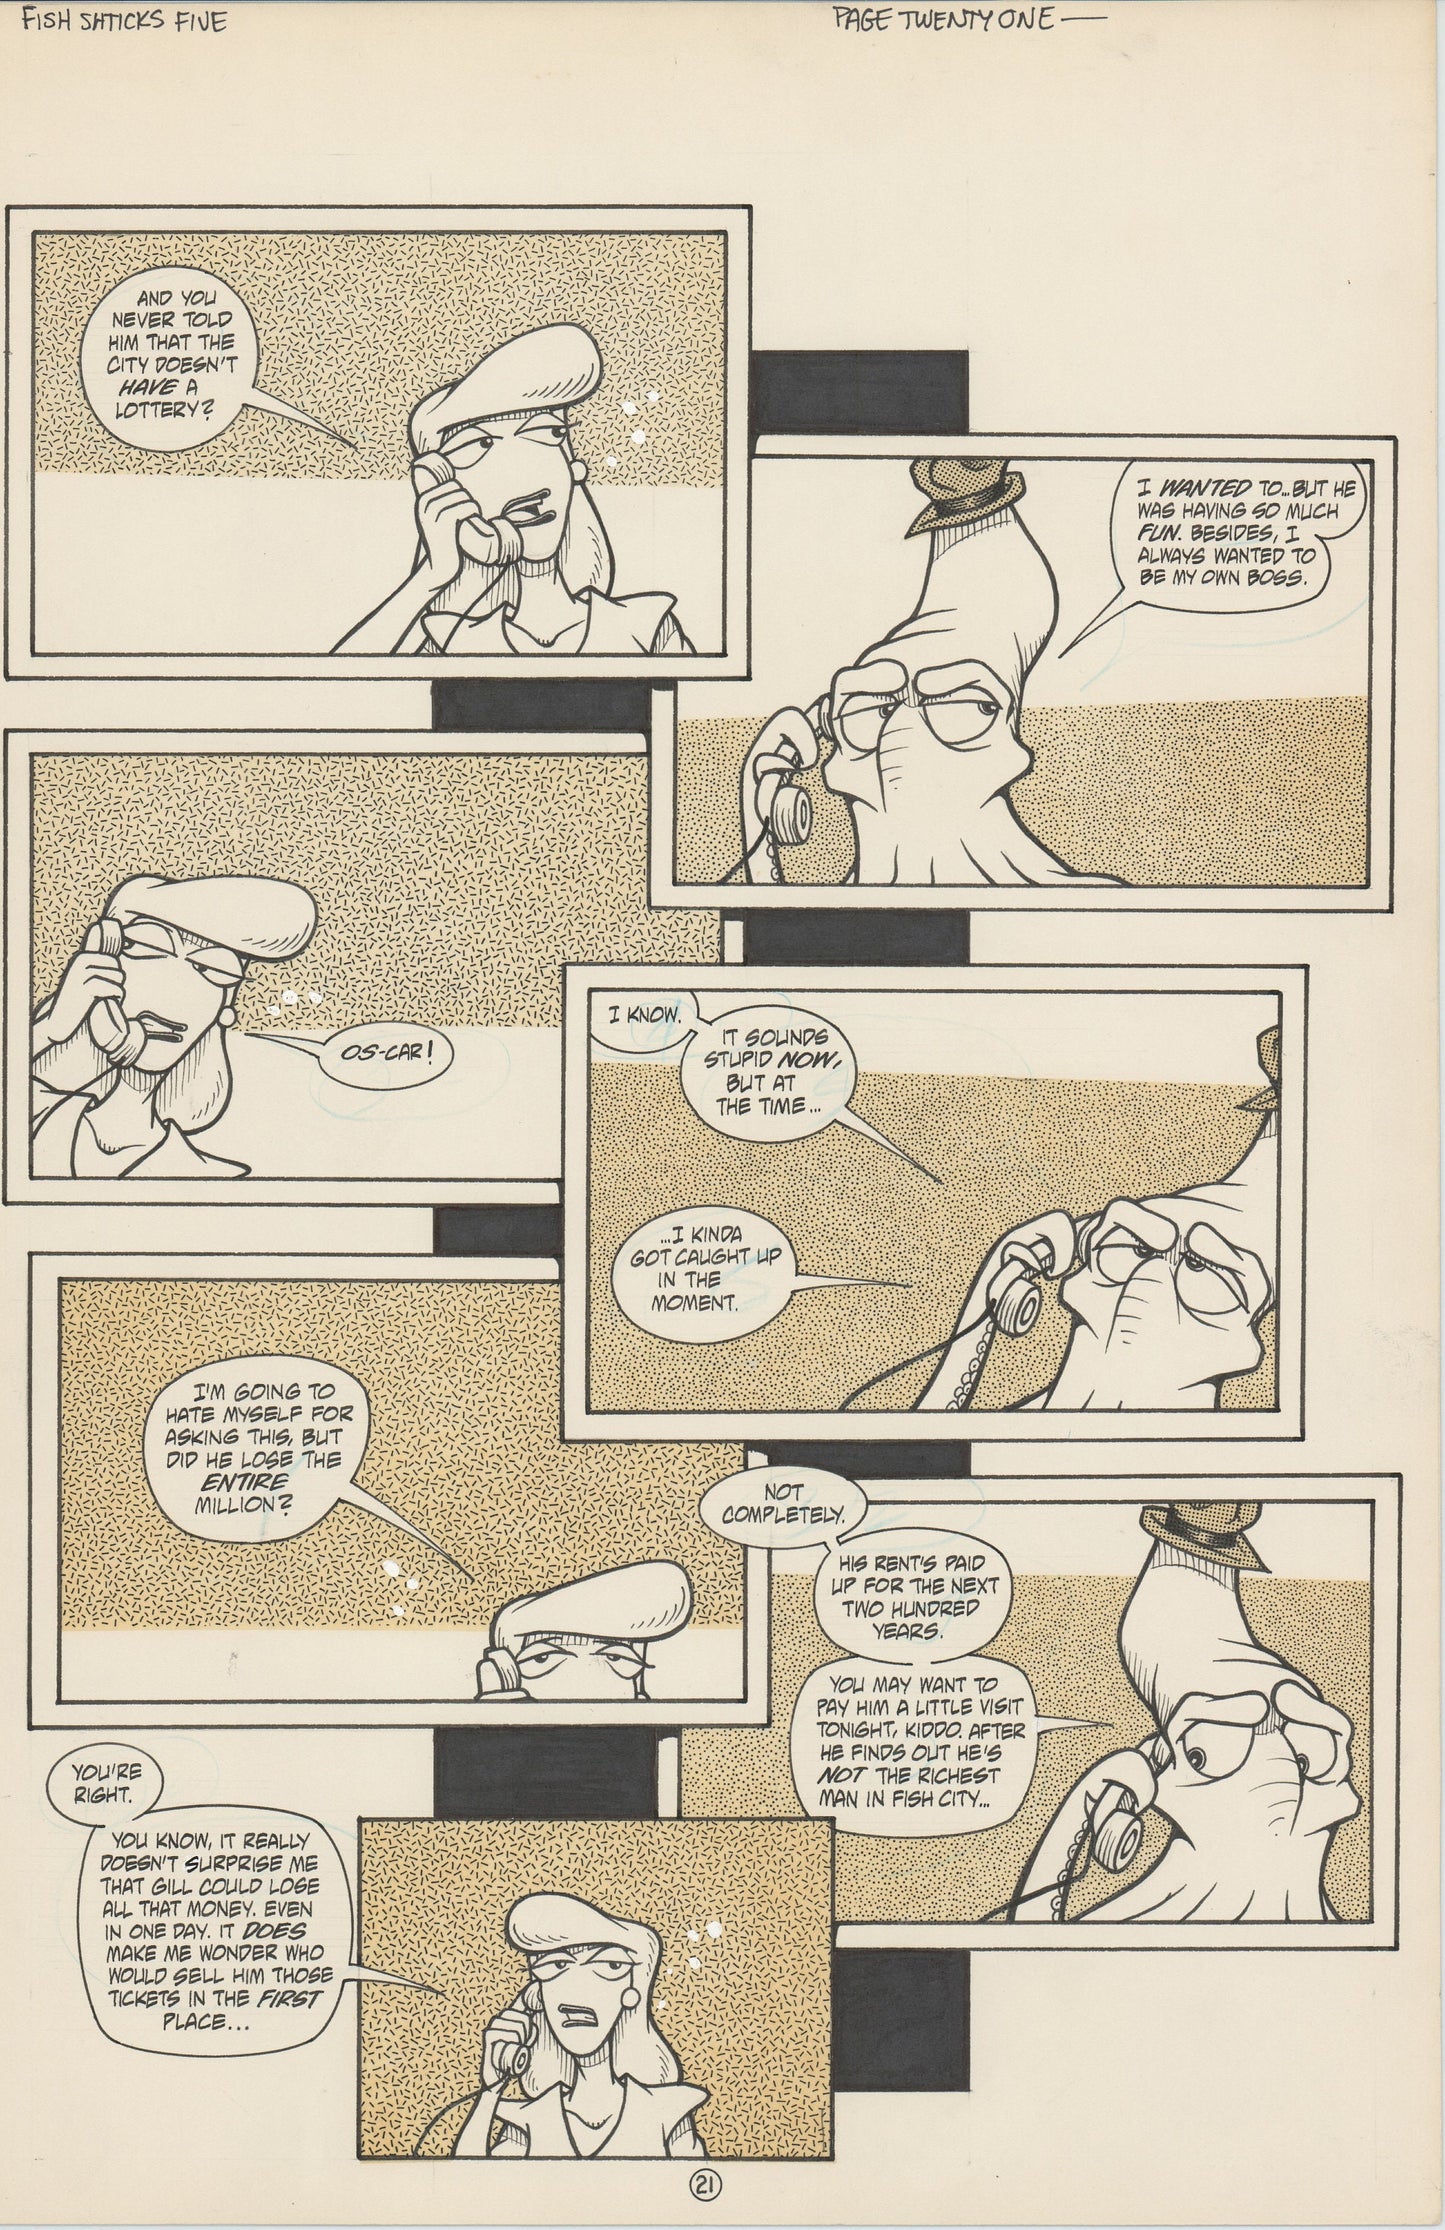 Fish Shticks #5 1992 Hand-inked original comic page by Steve Hauk and Steve Mancuse p21 Offshoot of Fish Police